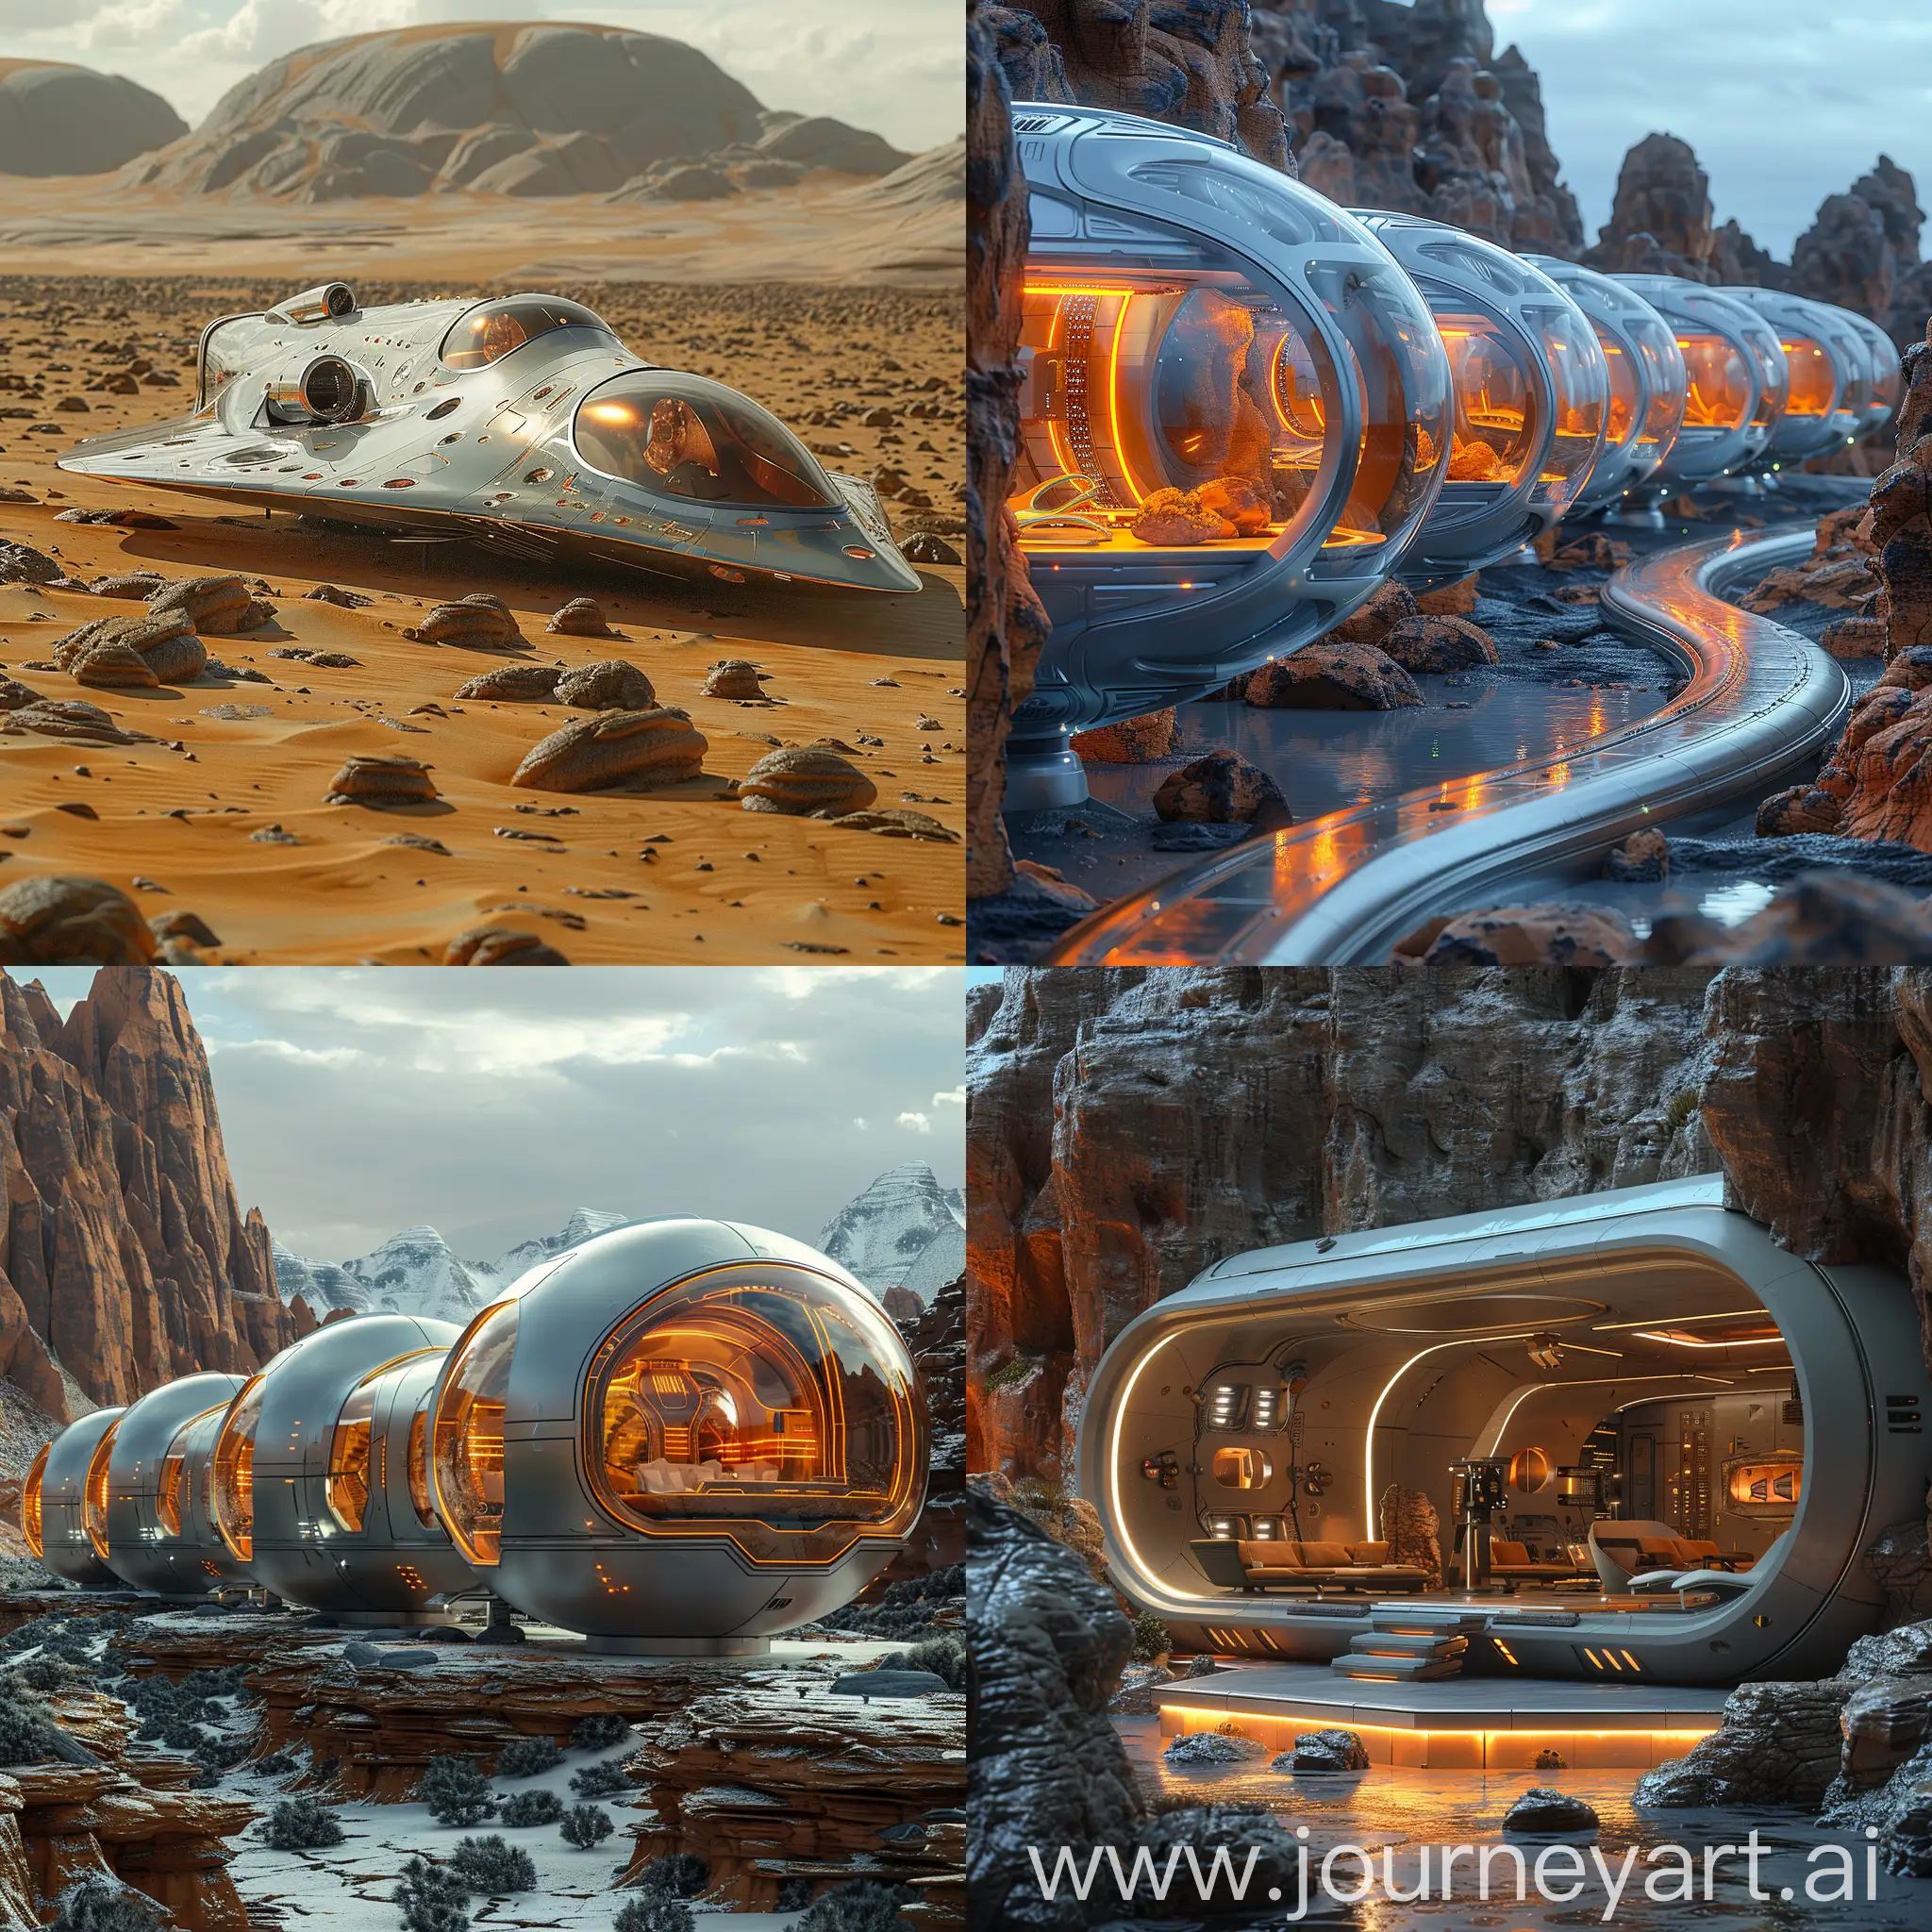 Futuristic-Mars-Habitat-Stainless-Steel-and-Smart-Materials-in-HighTech-Octane-Render